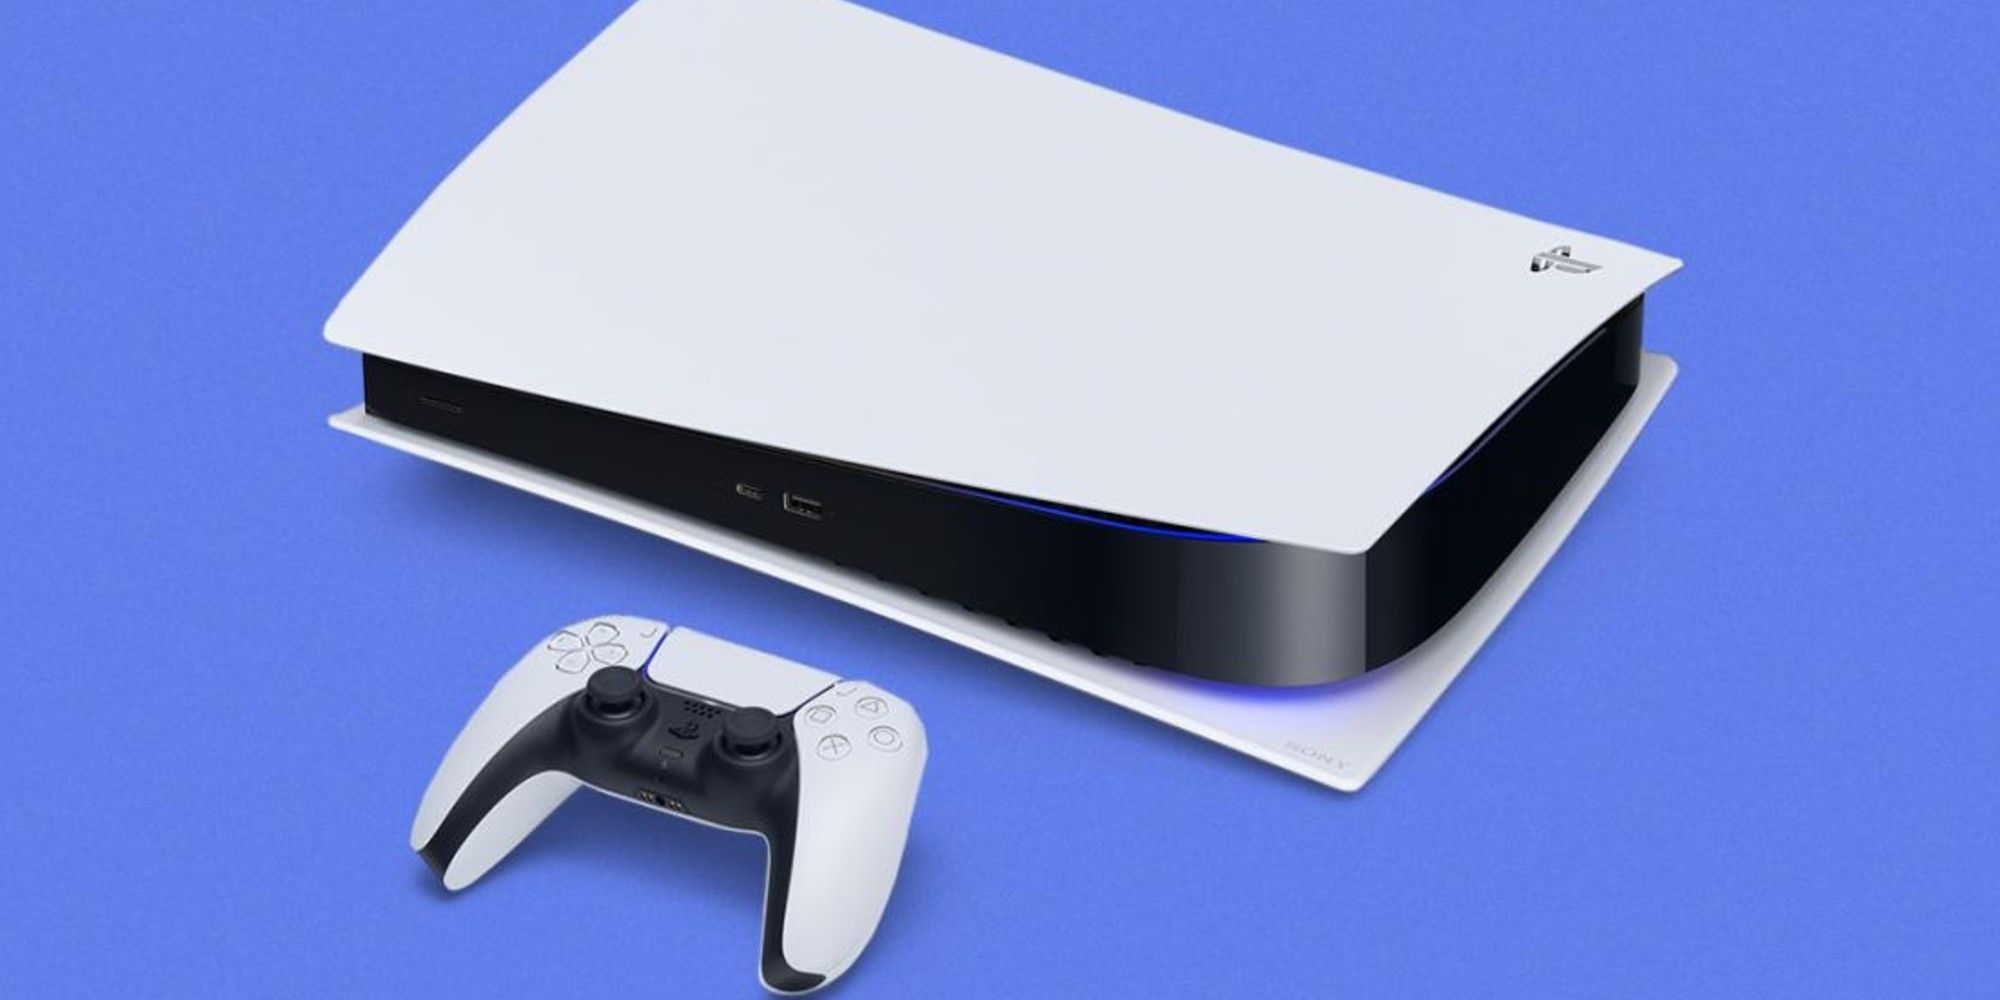 What The PS5 Looks Like On Its Side